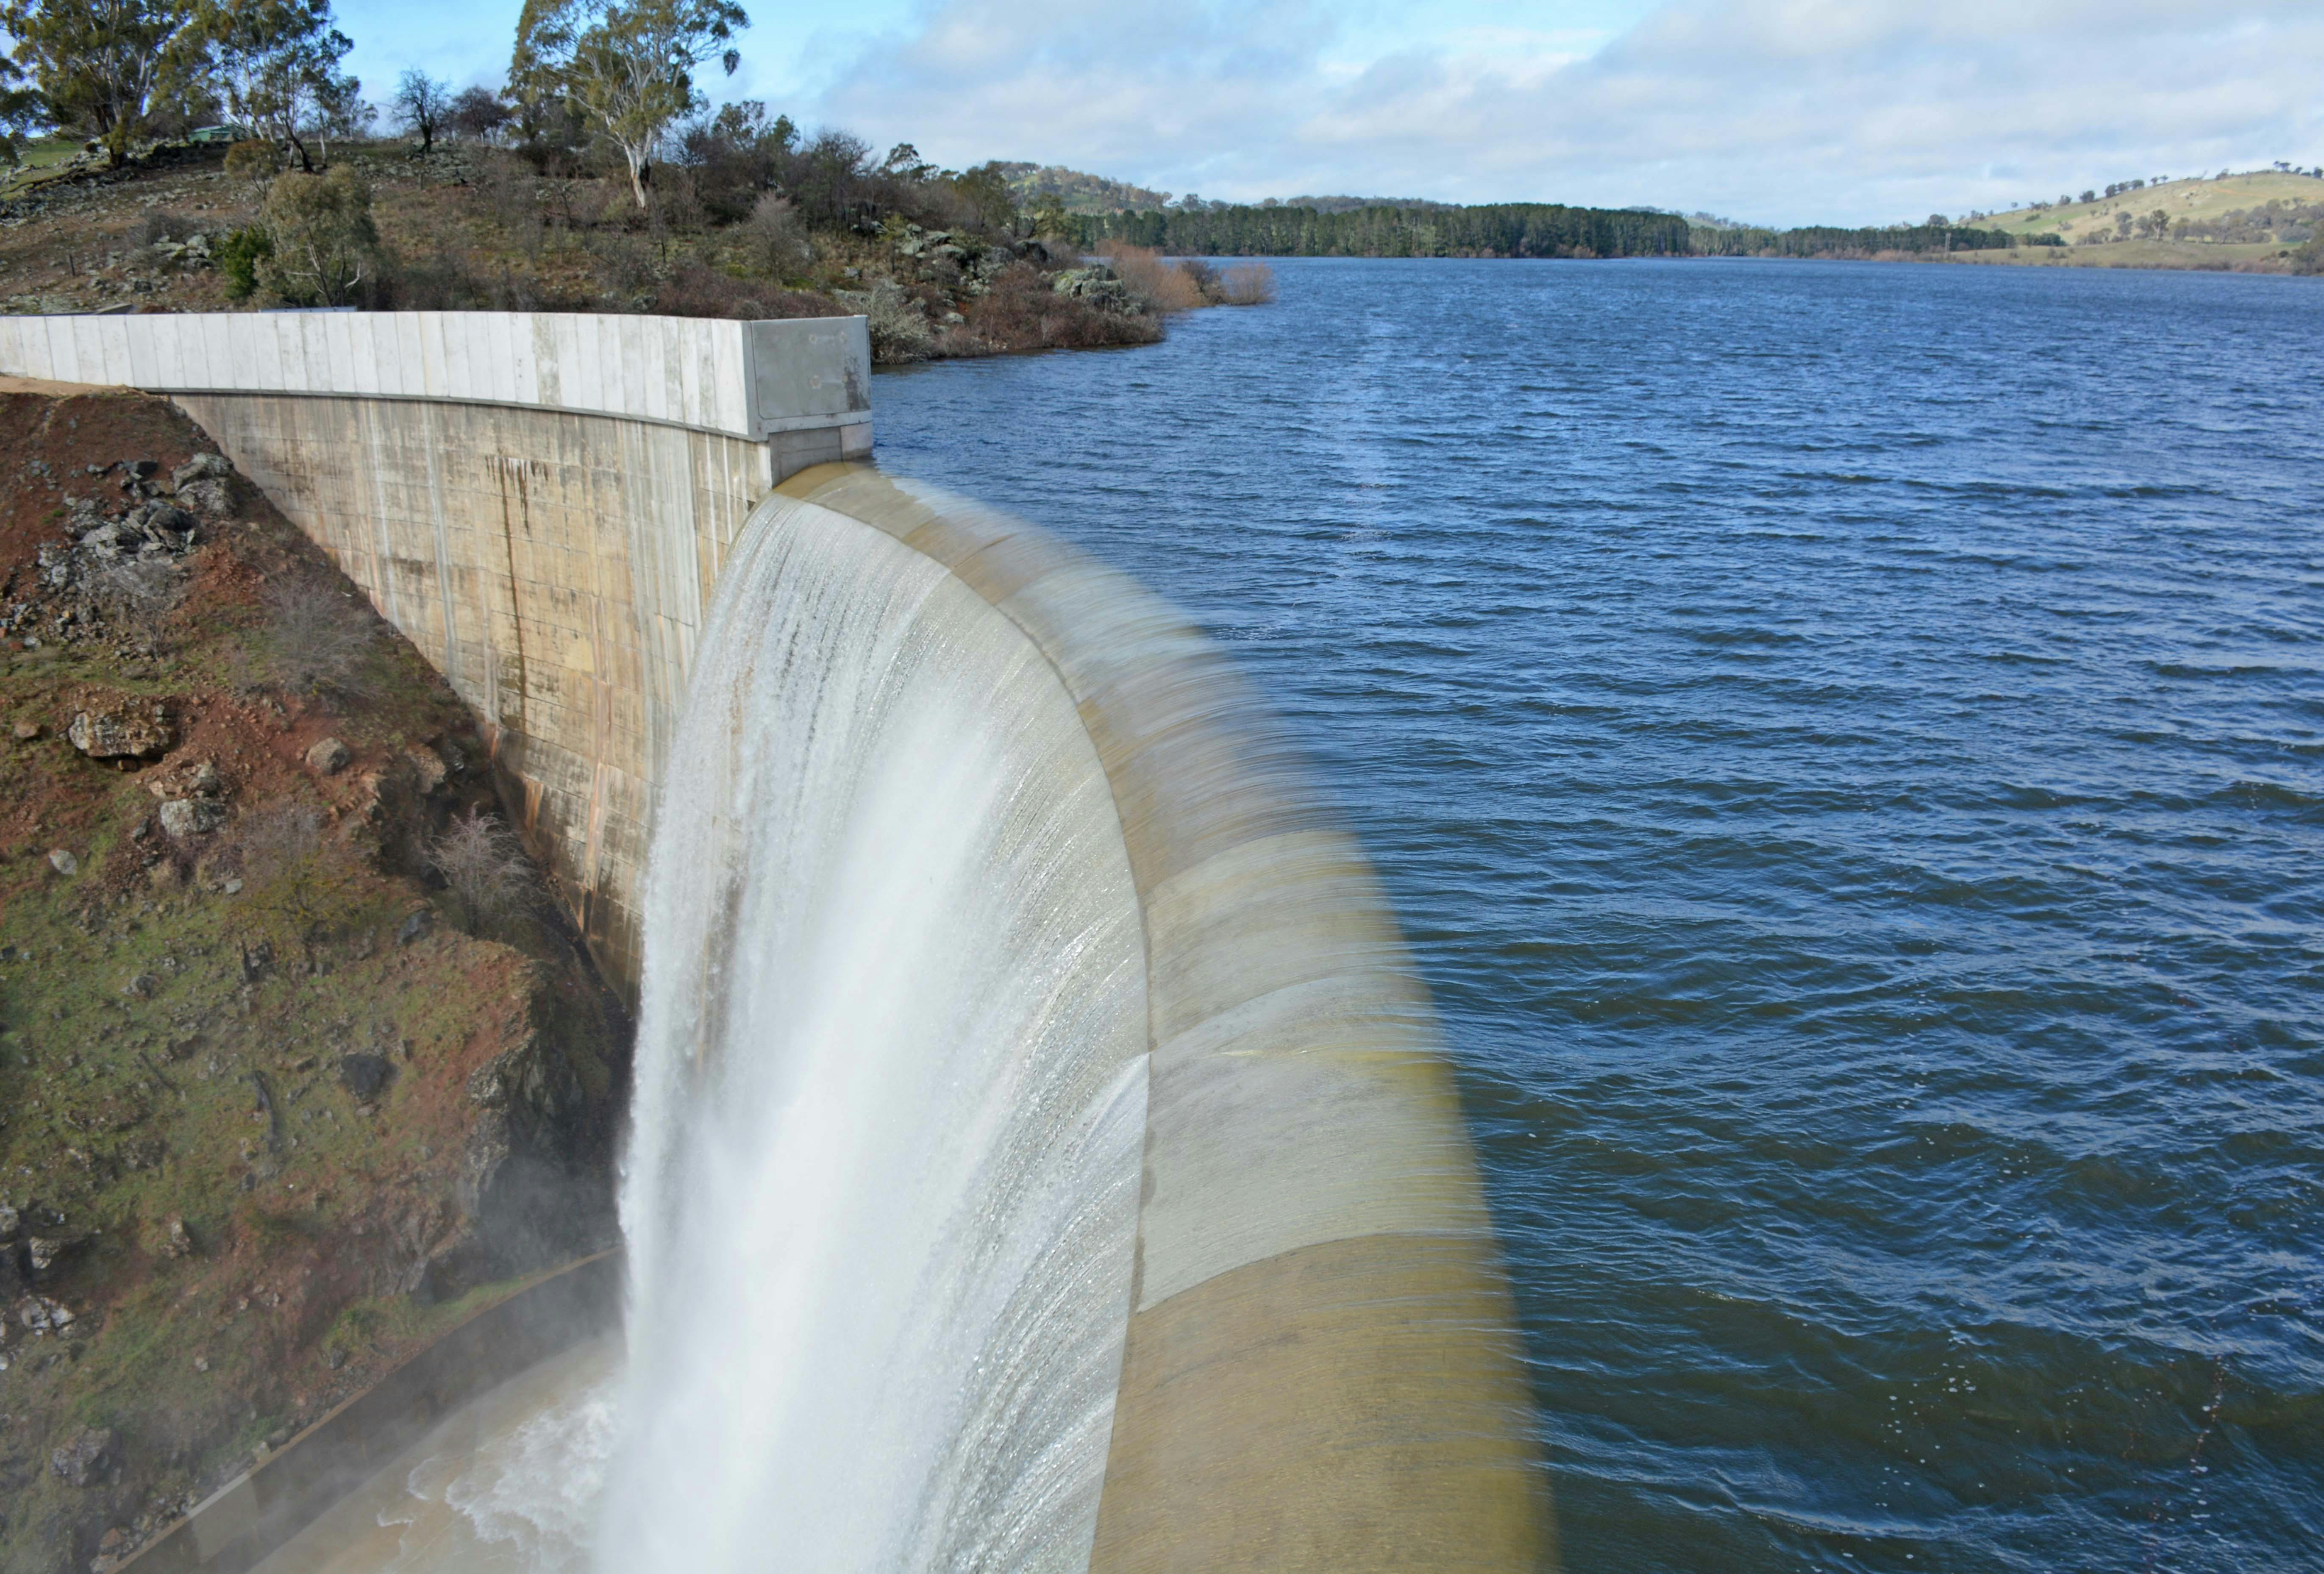 Water flows over the new higher dam wall at Suma Park